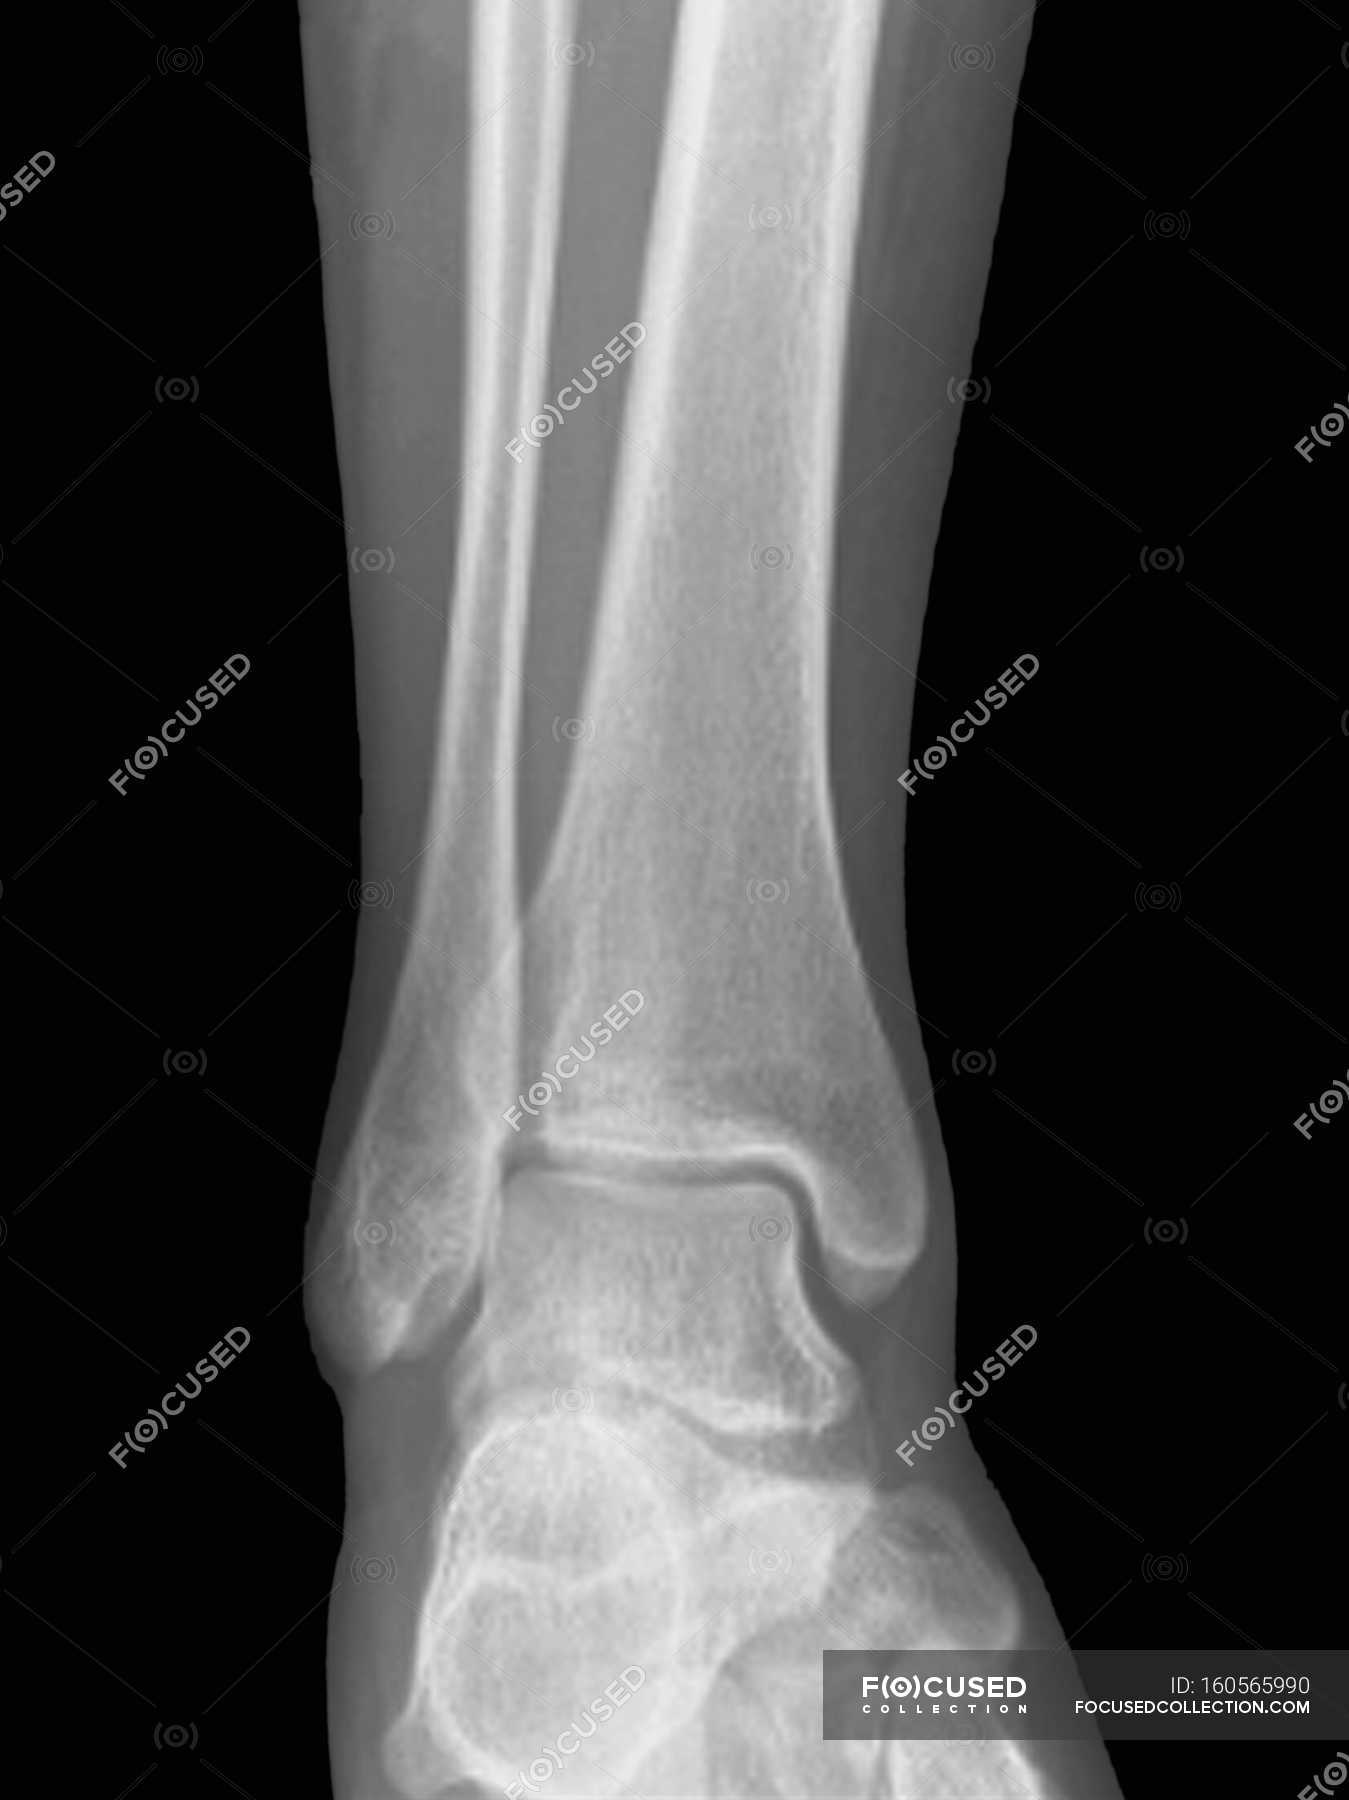 Normal ankle joint, frontal X-ray. — front view, human body - Stock